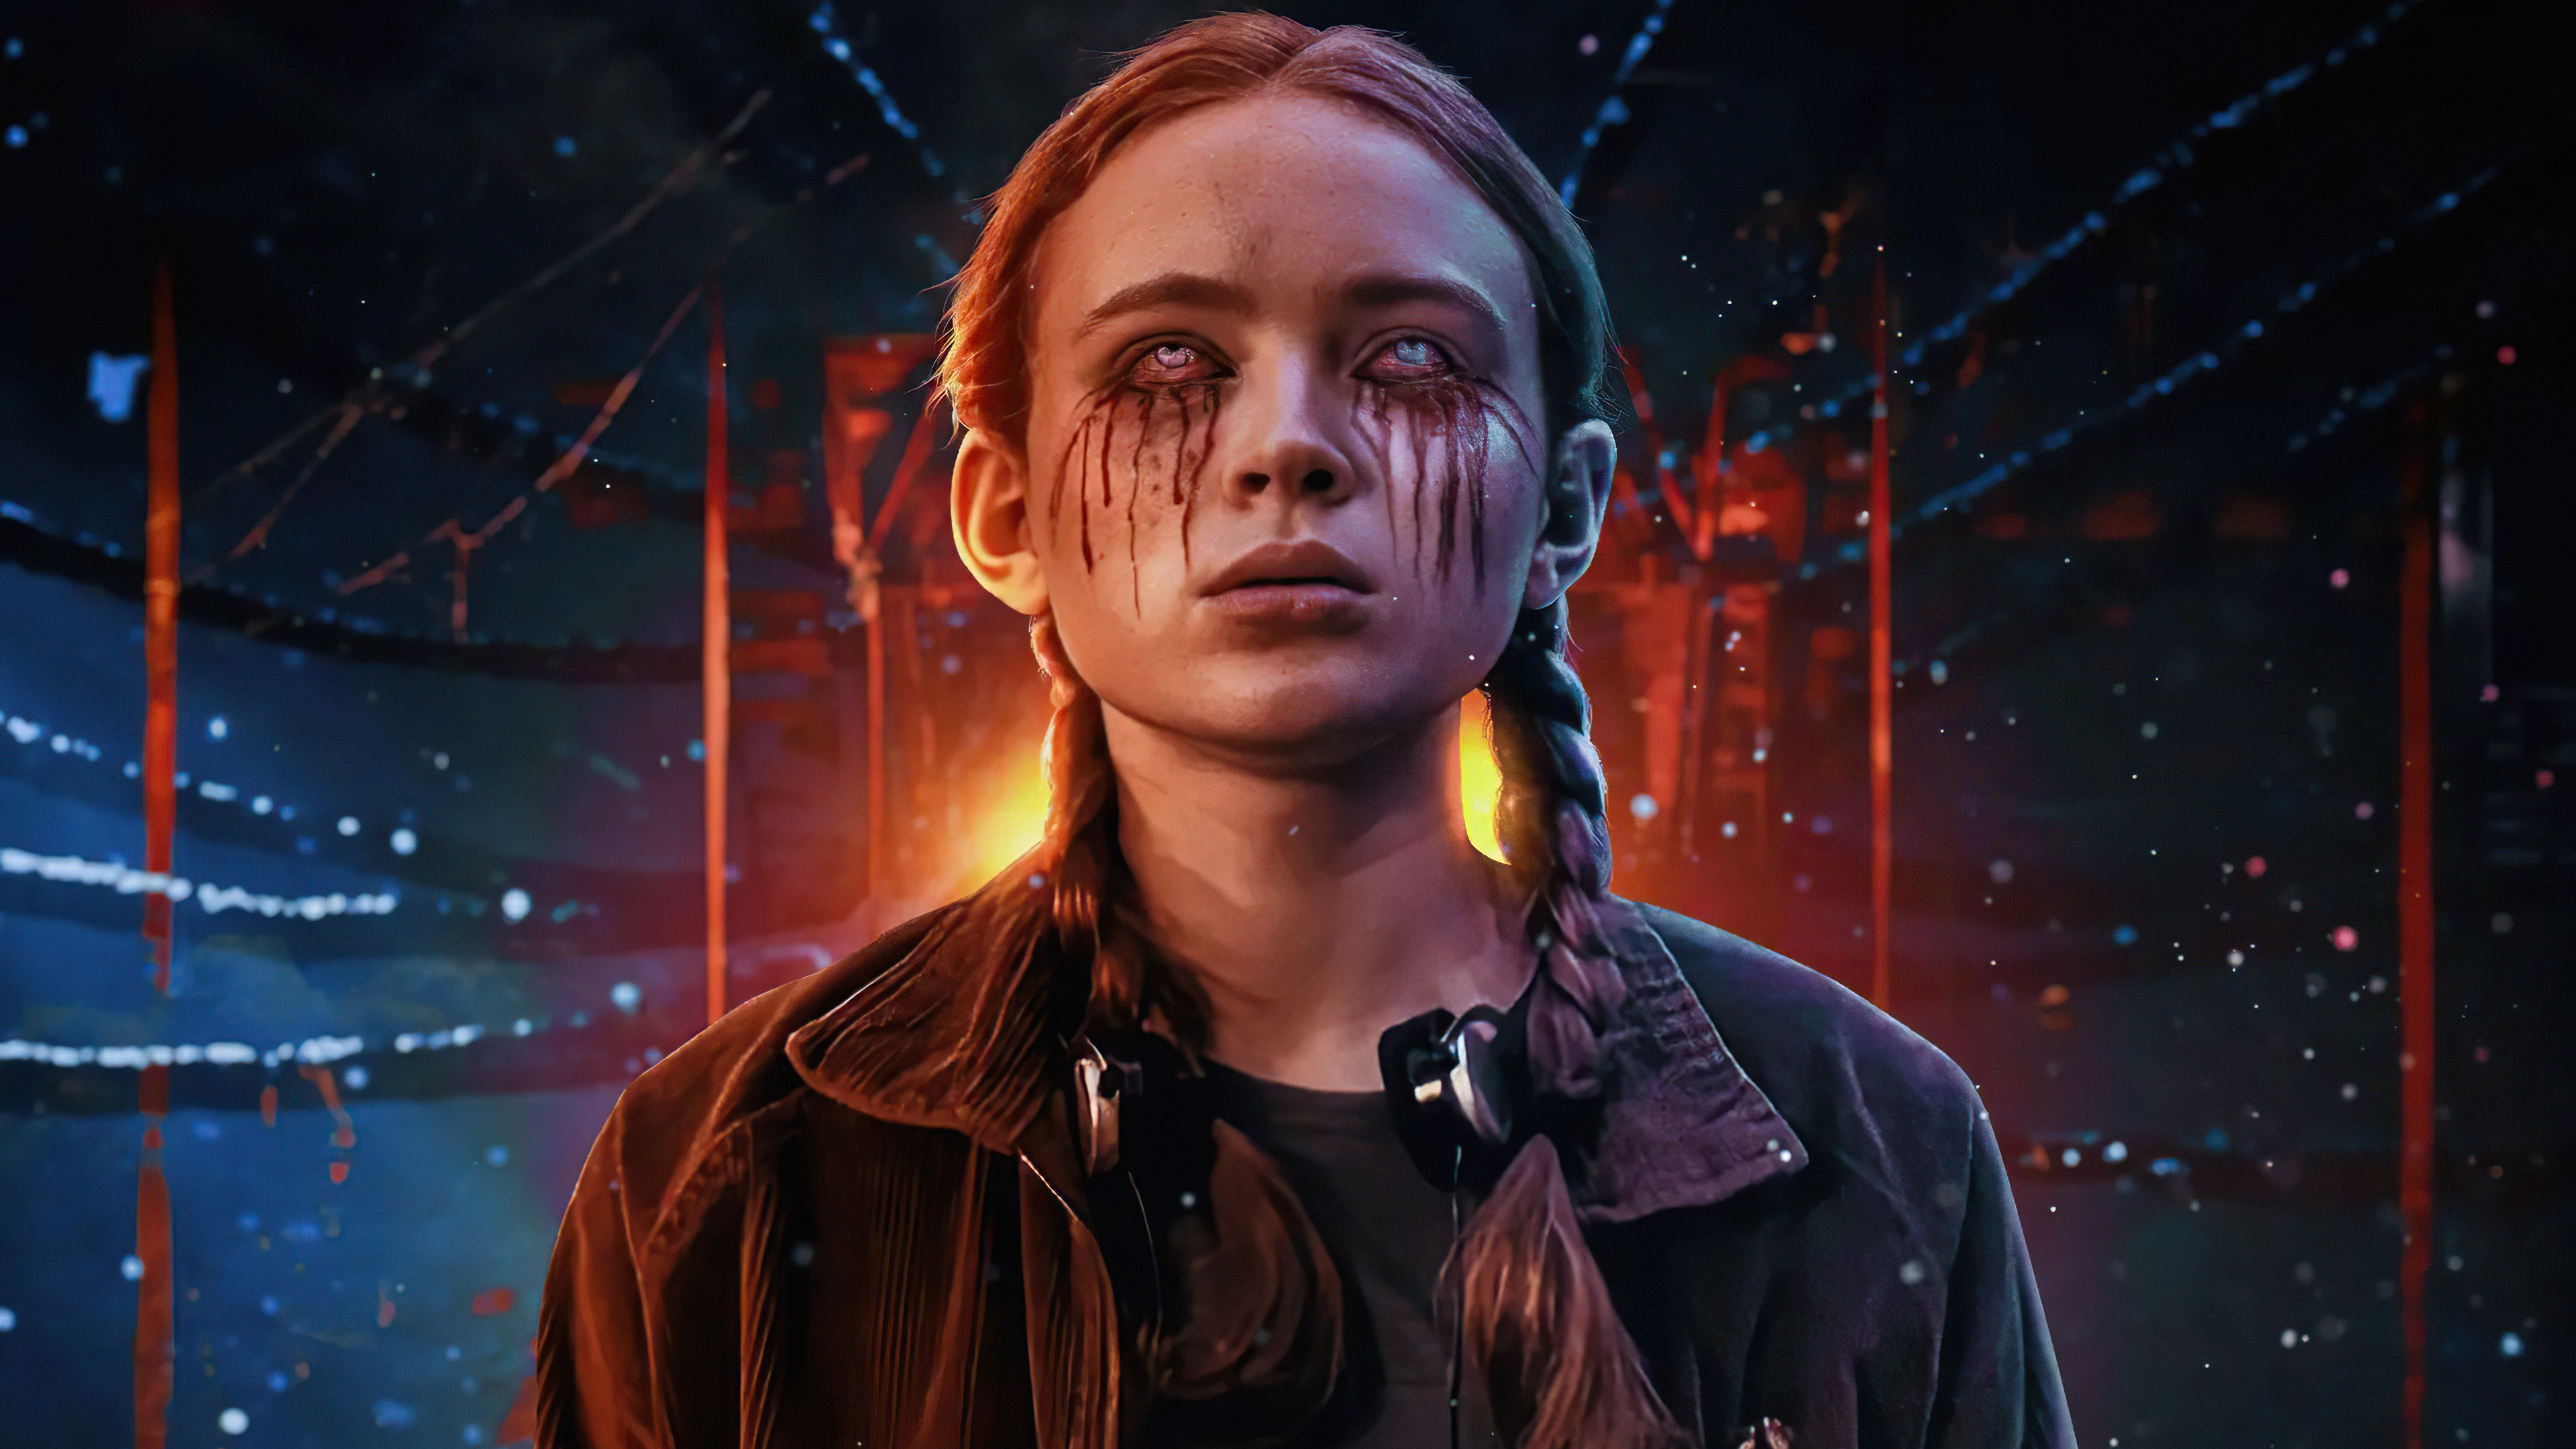 3840x2160 Maxmayfield Sadie Sink Stranger Things 4, HD Tv Shows, 4k Wallpapers, Images, Backgrounds, Photos and Pictures